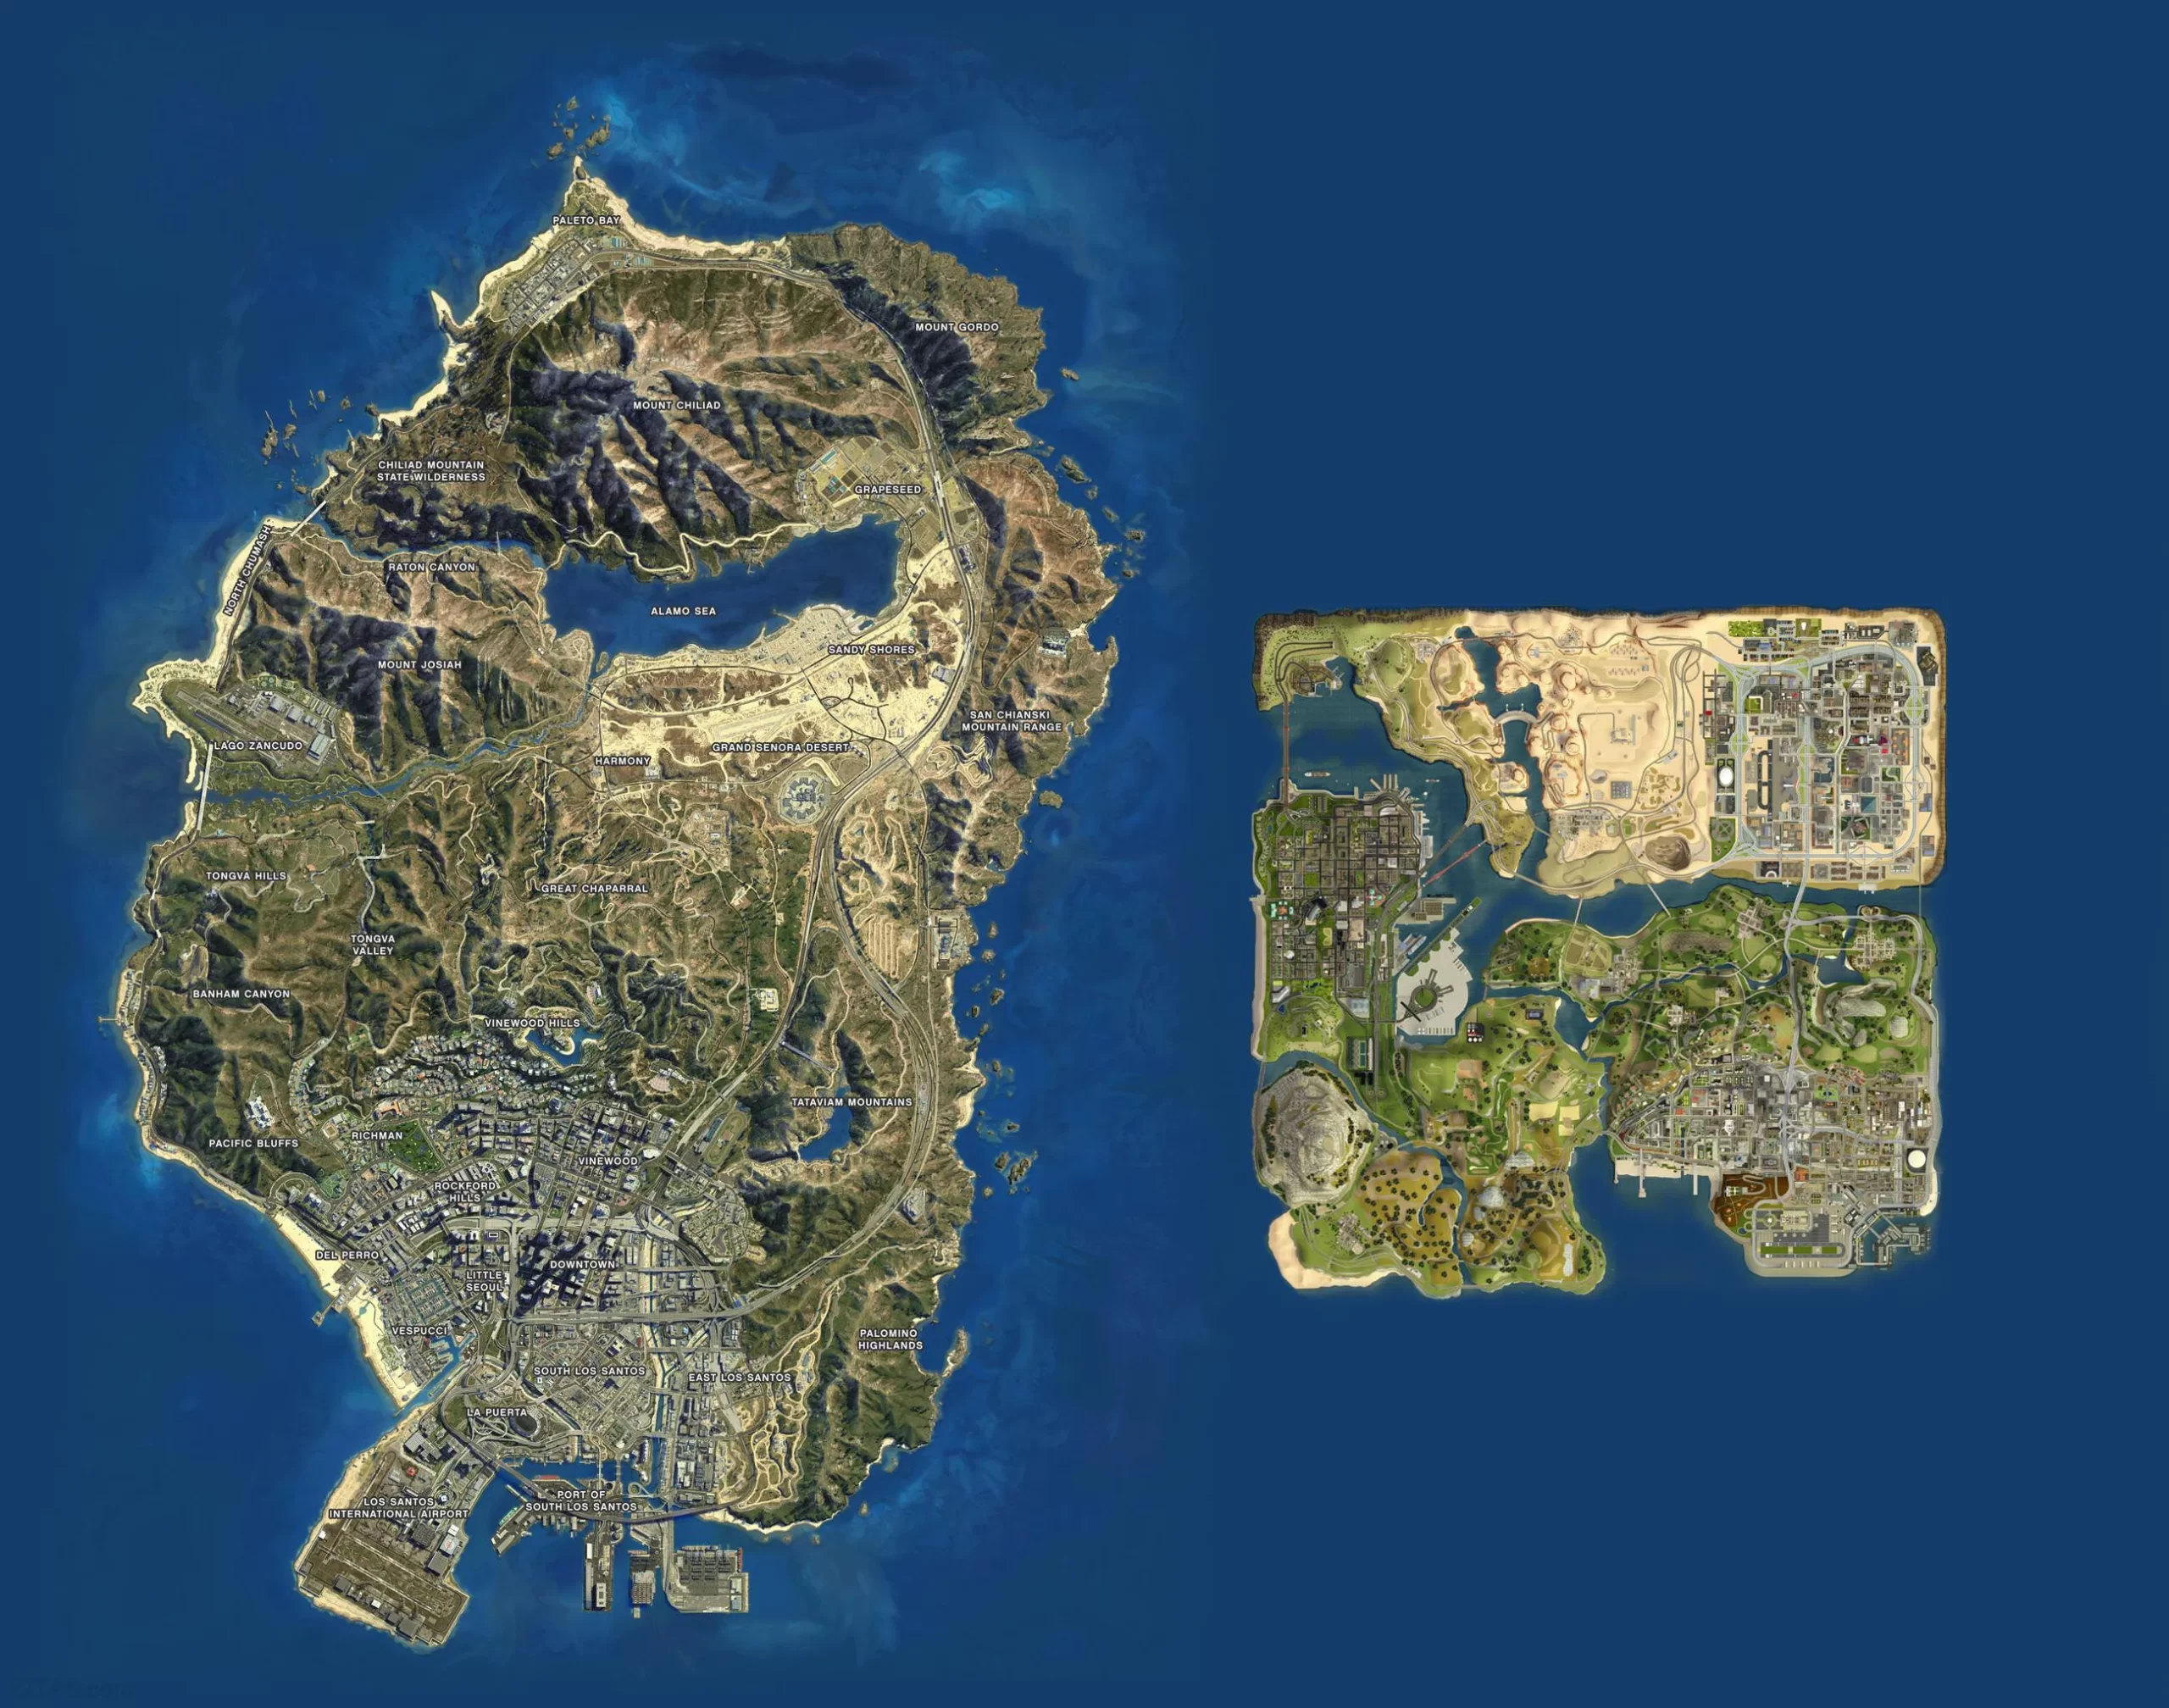 GTA"s Los Santos and Blaine County: Comparison between two and Exploration